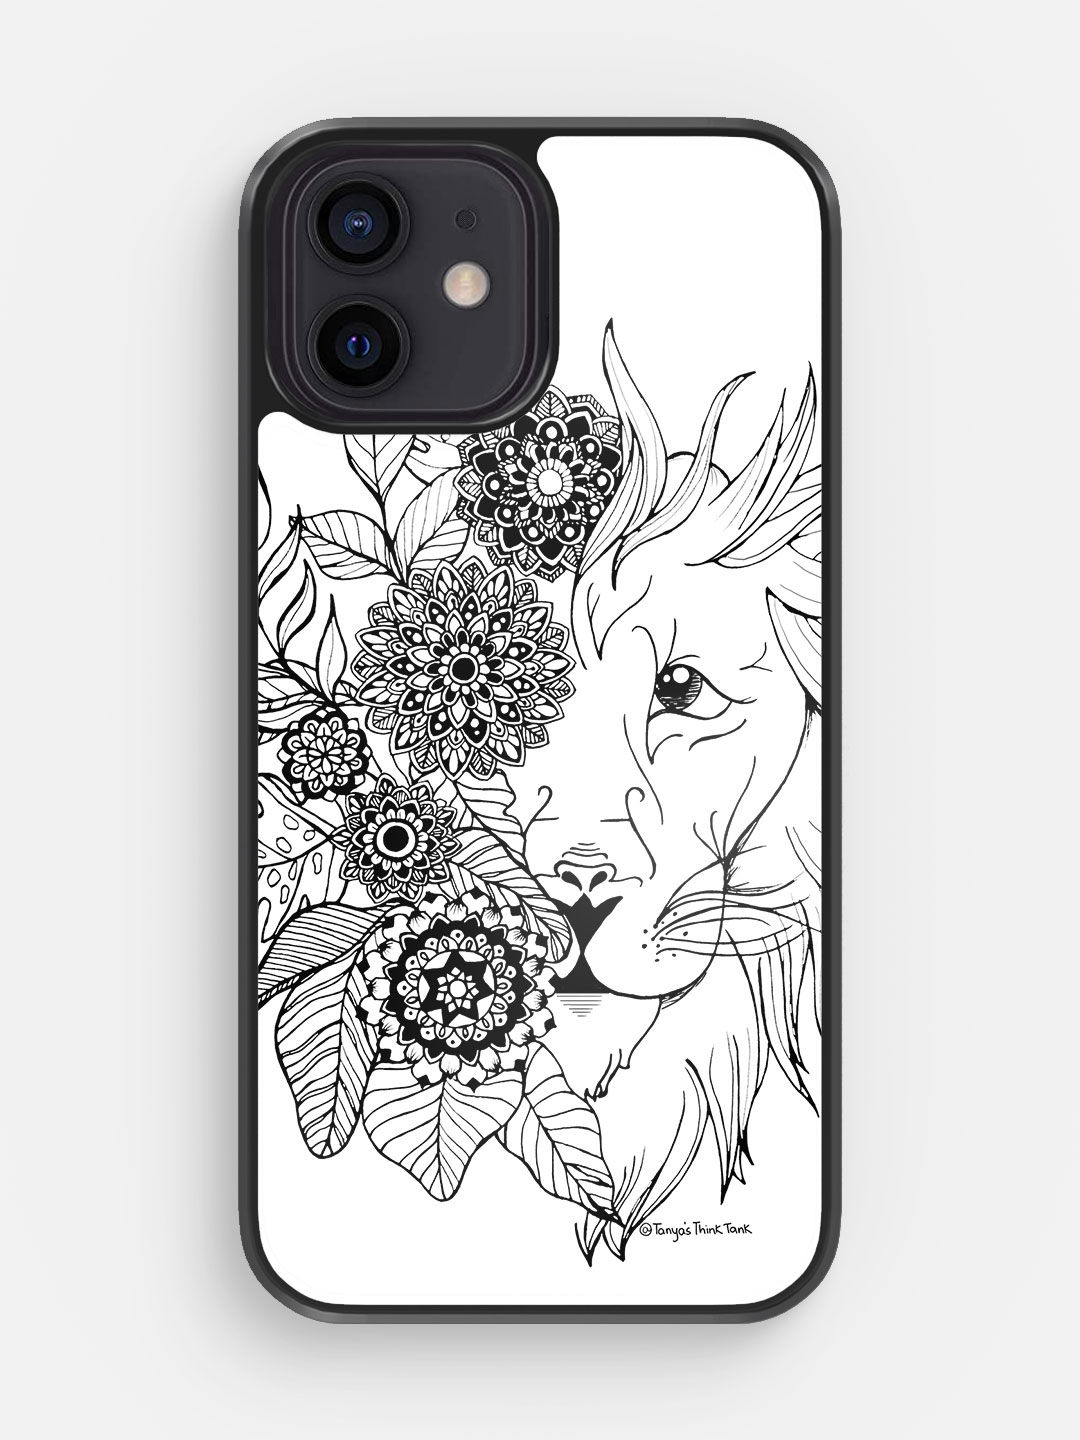 Buy Lion - Bumper Phone Case for iPhone 12 Phone Cases & Covers Online